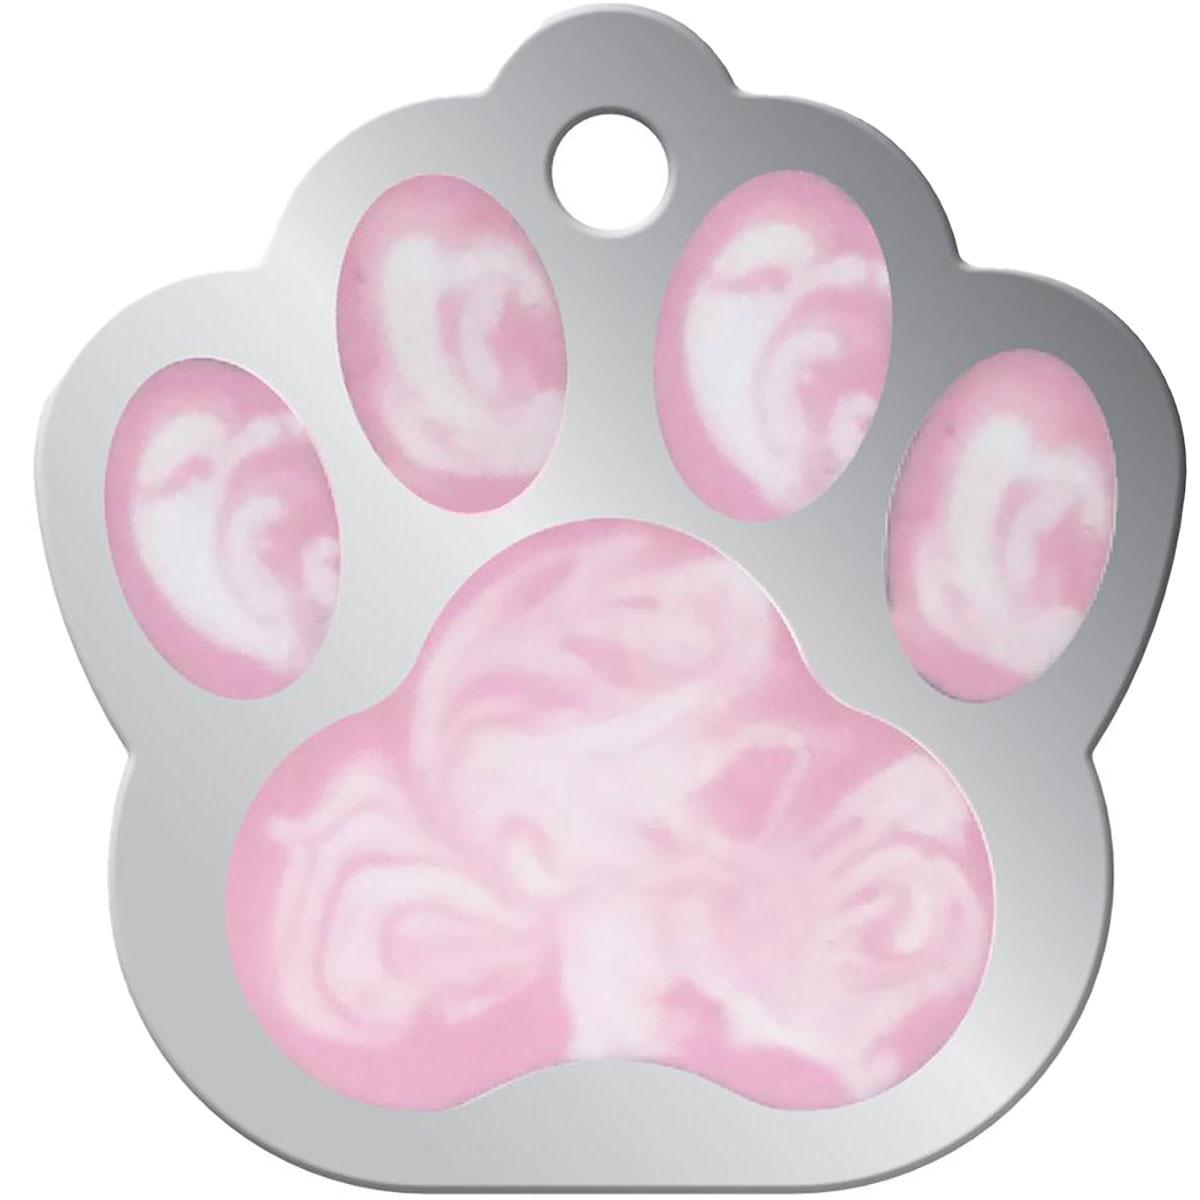 Paw Print Large Engravable Pet I.D. Tag - Pink Marble